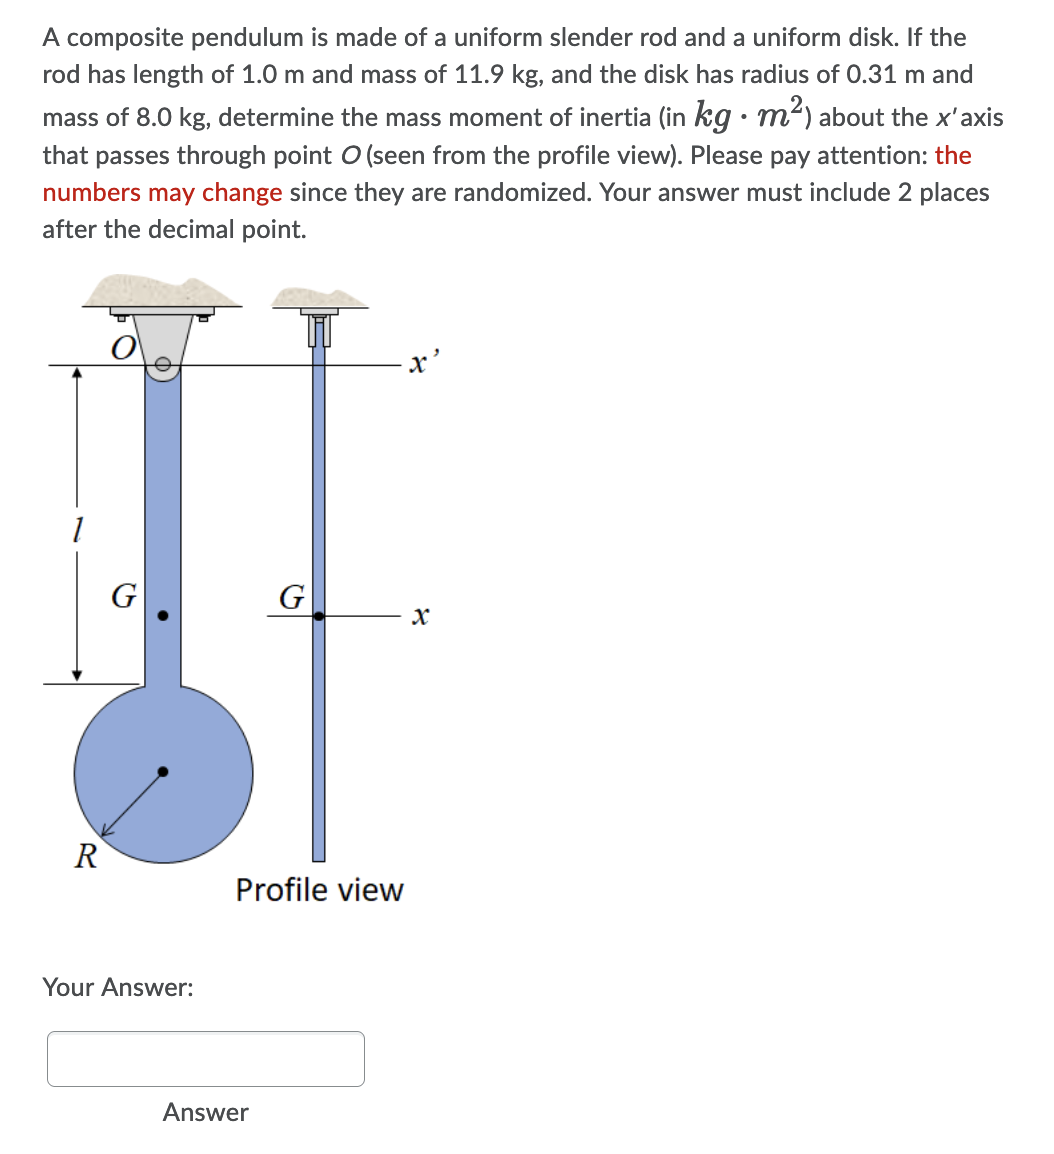 A composite pendulum is made of a uniform slender rod and a uniform disk. If the
rod has length of 1.0 m and mass of 11.9 kg, and the disk has radius of 0.31 m and
mass of 8.0 kg, determine the mass moment of inertia (in kg · m²) about the x'axis
that passes through point O (seen from the profile view). Please pay attention: the
numbers may change since they are randomized. Your answer must include 2 places
after the decimal point.
G
R
Profile view
Your Answer:
Answer
